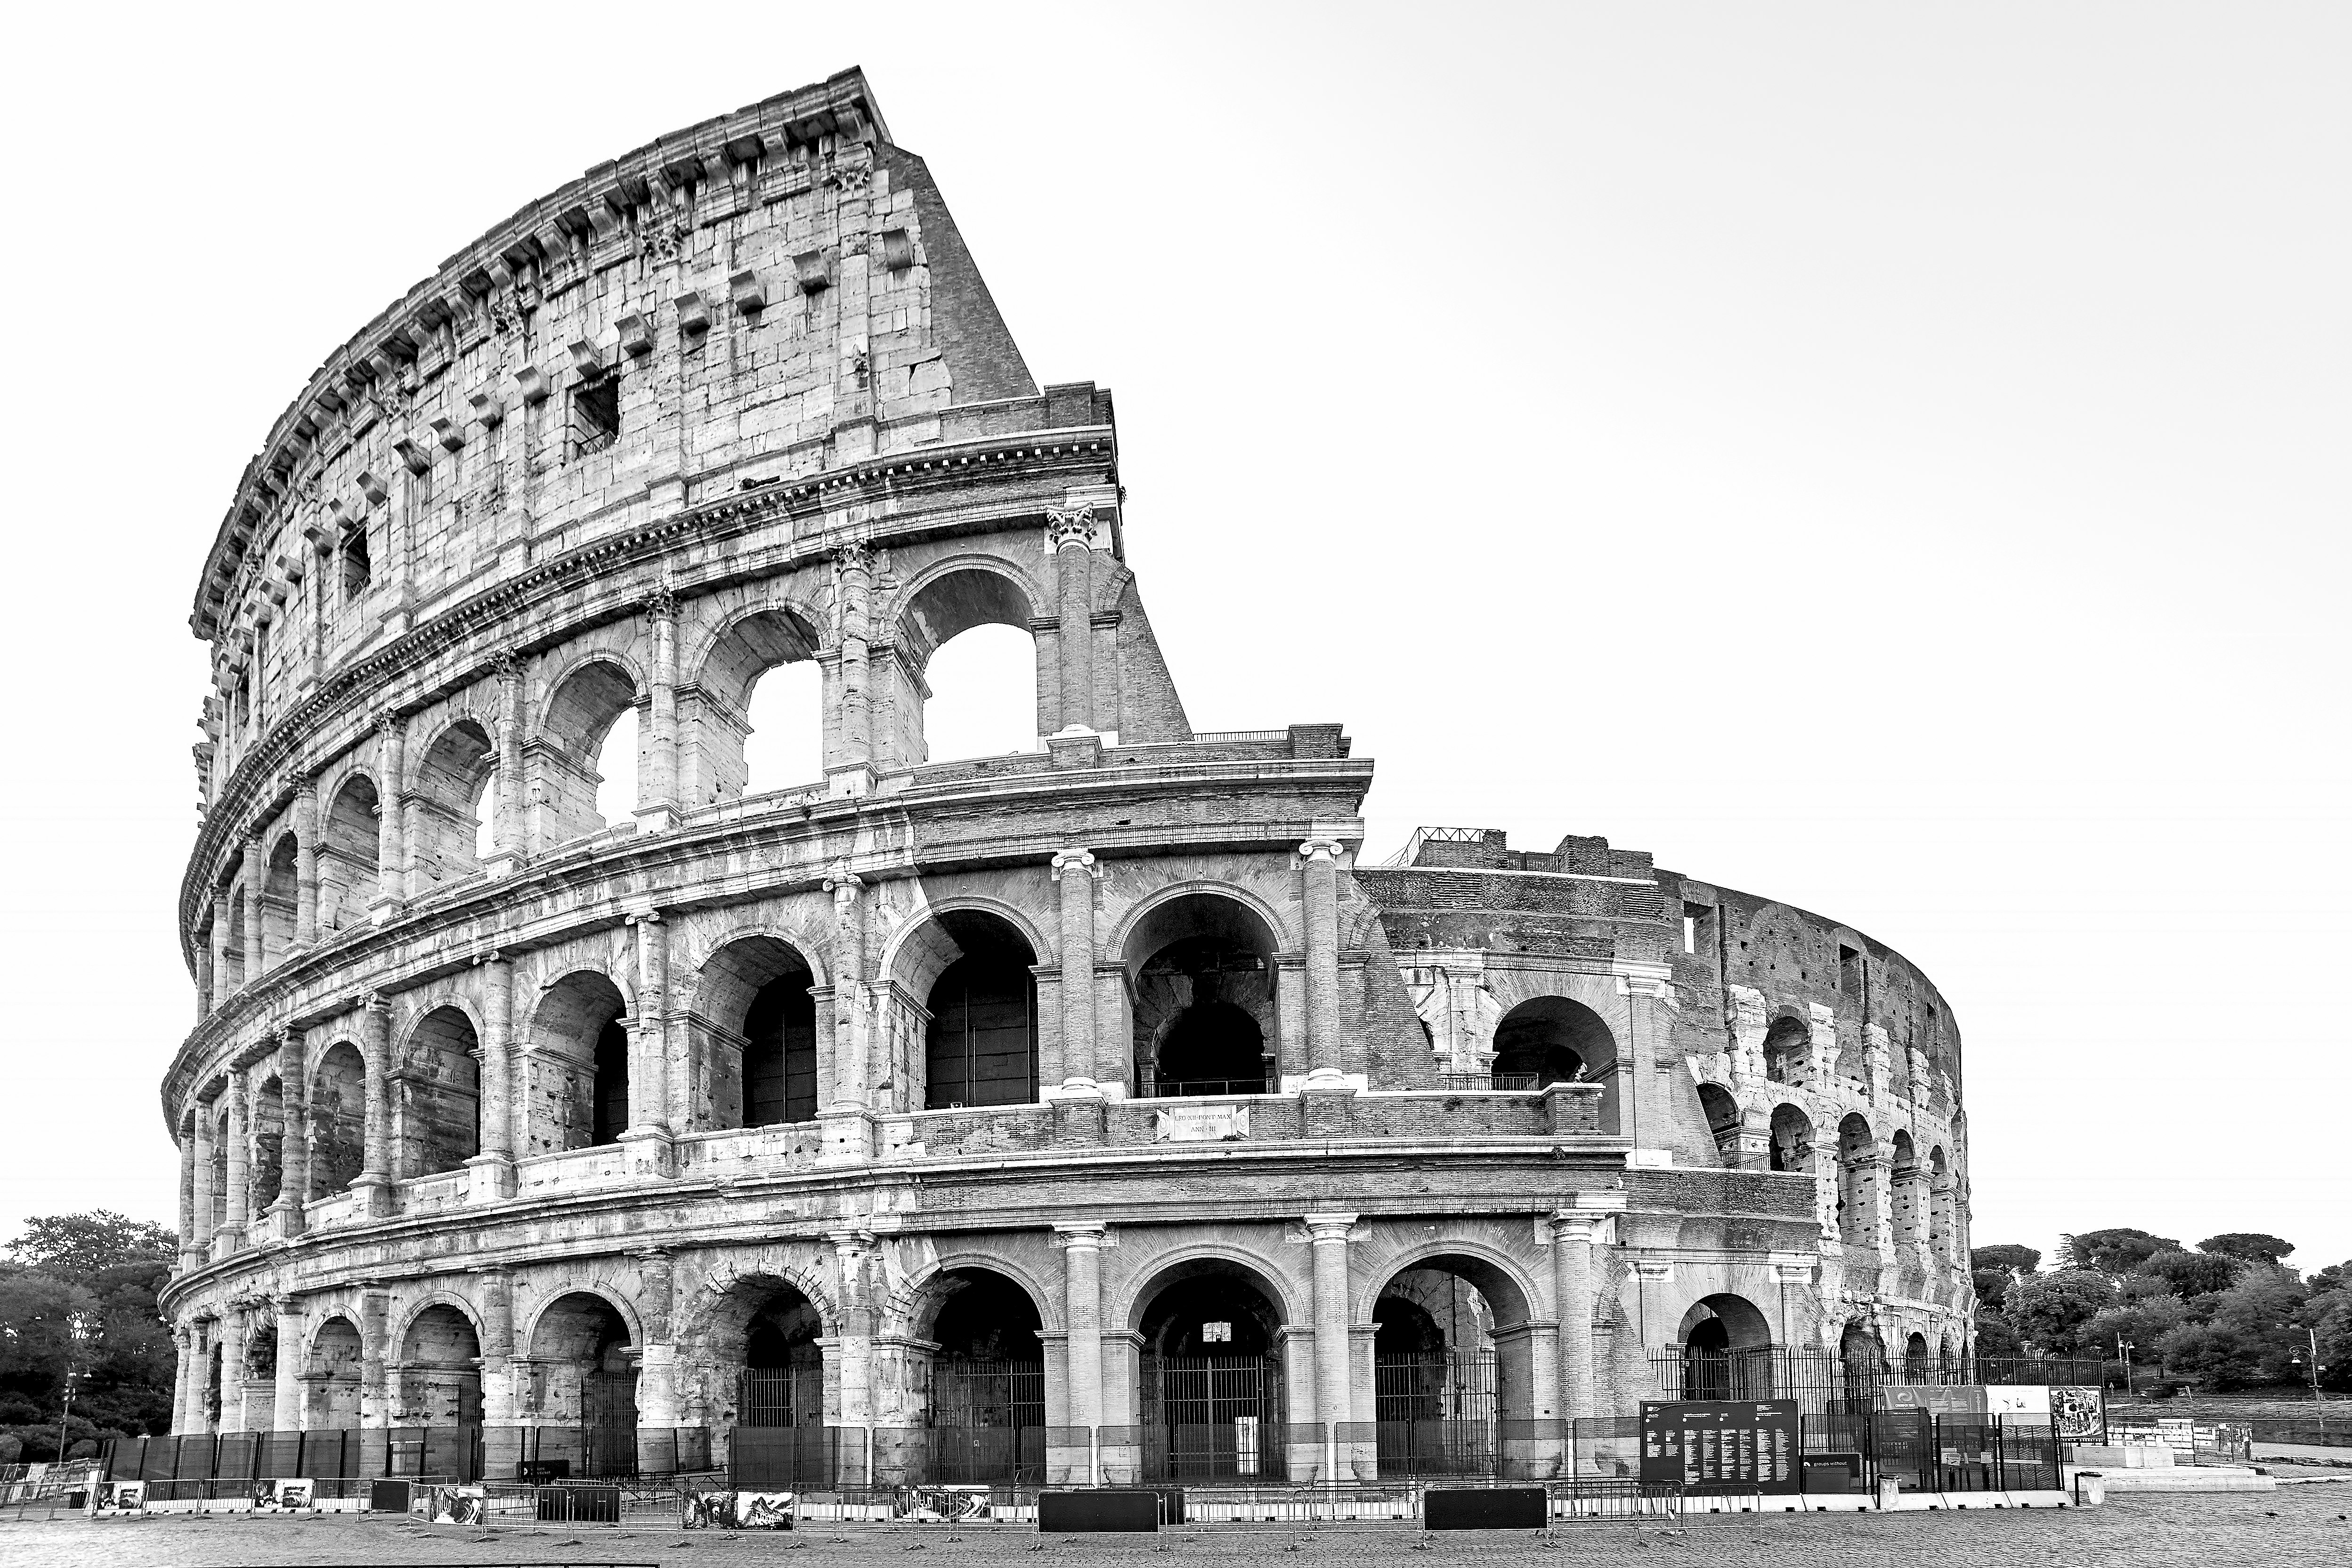 Colosseum, Rome during day